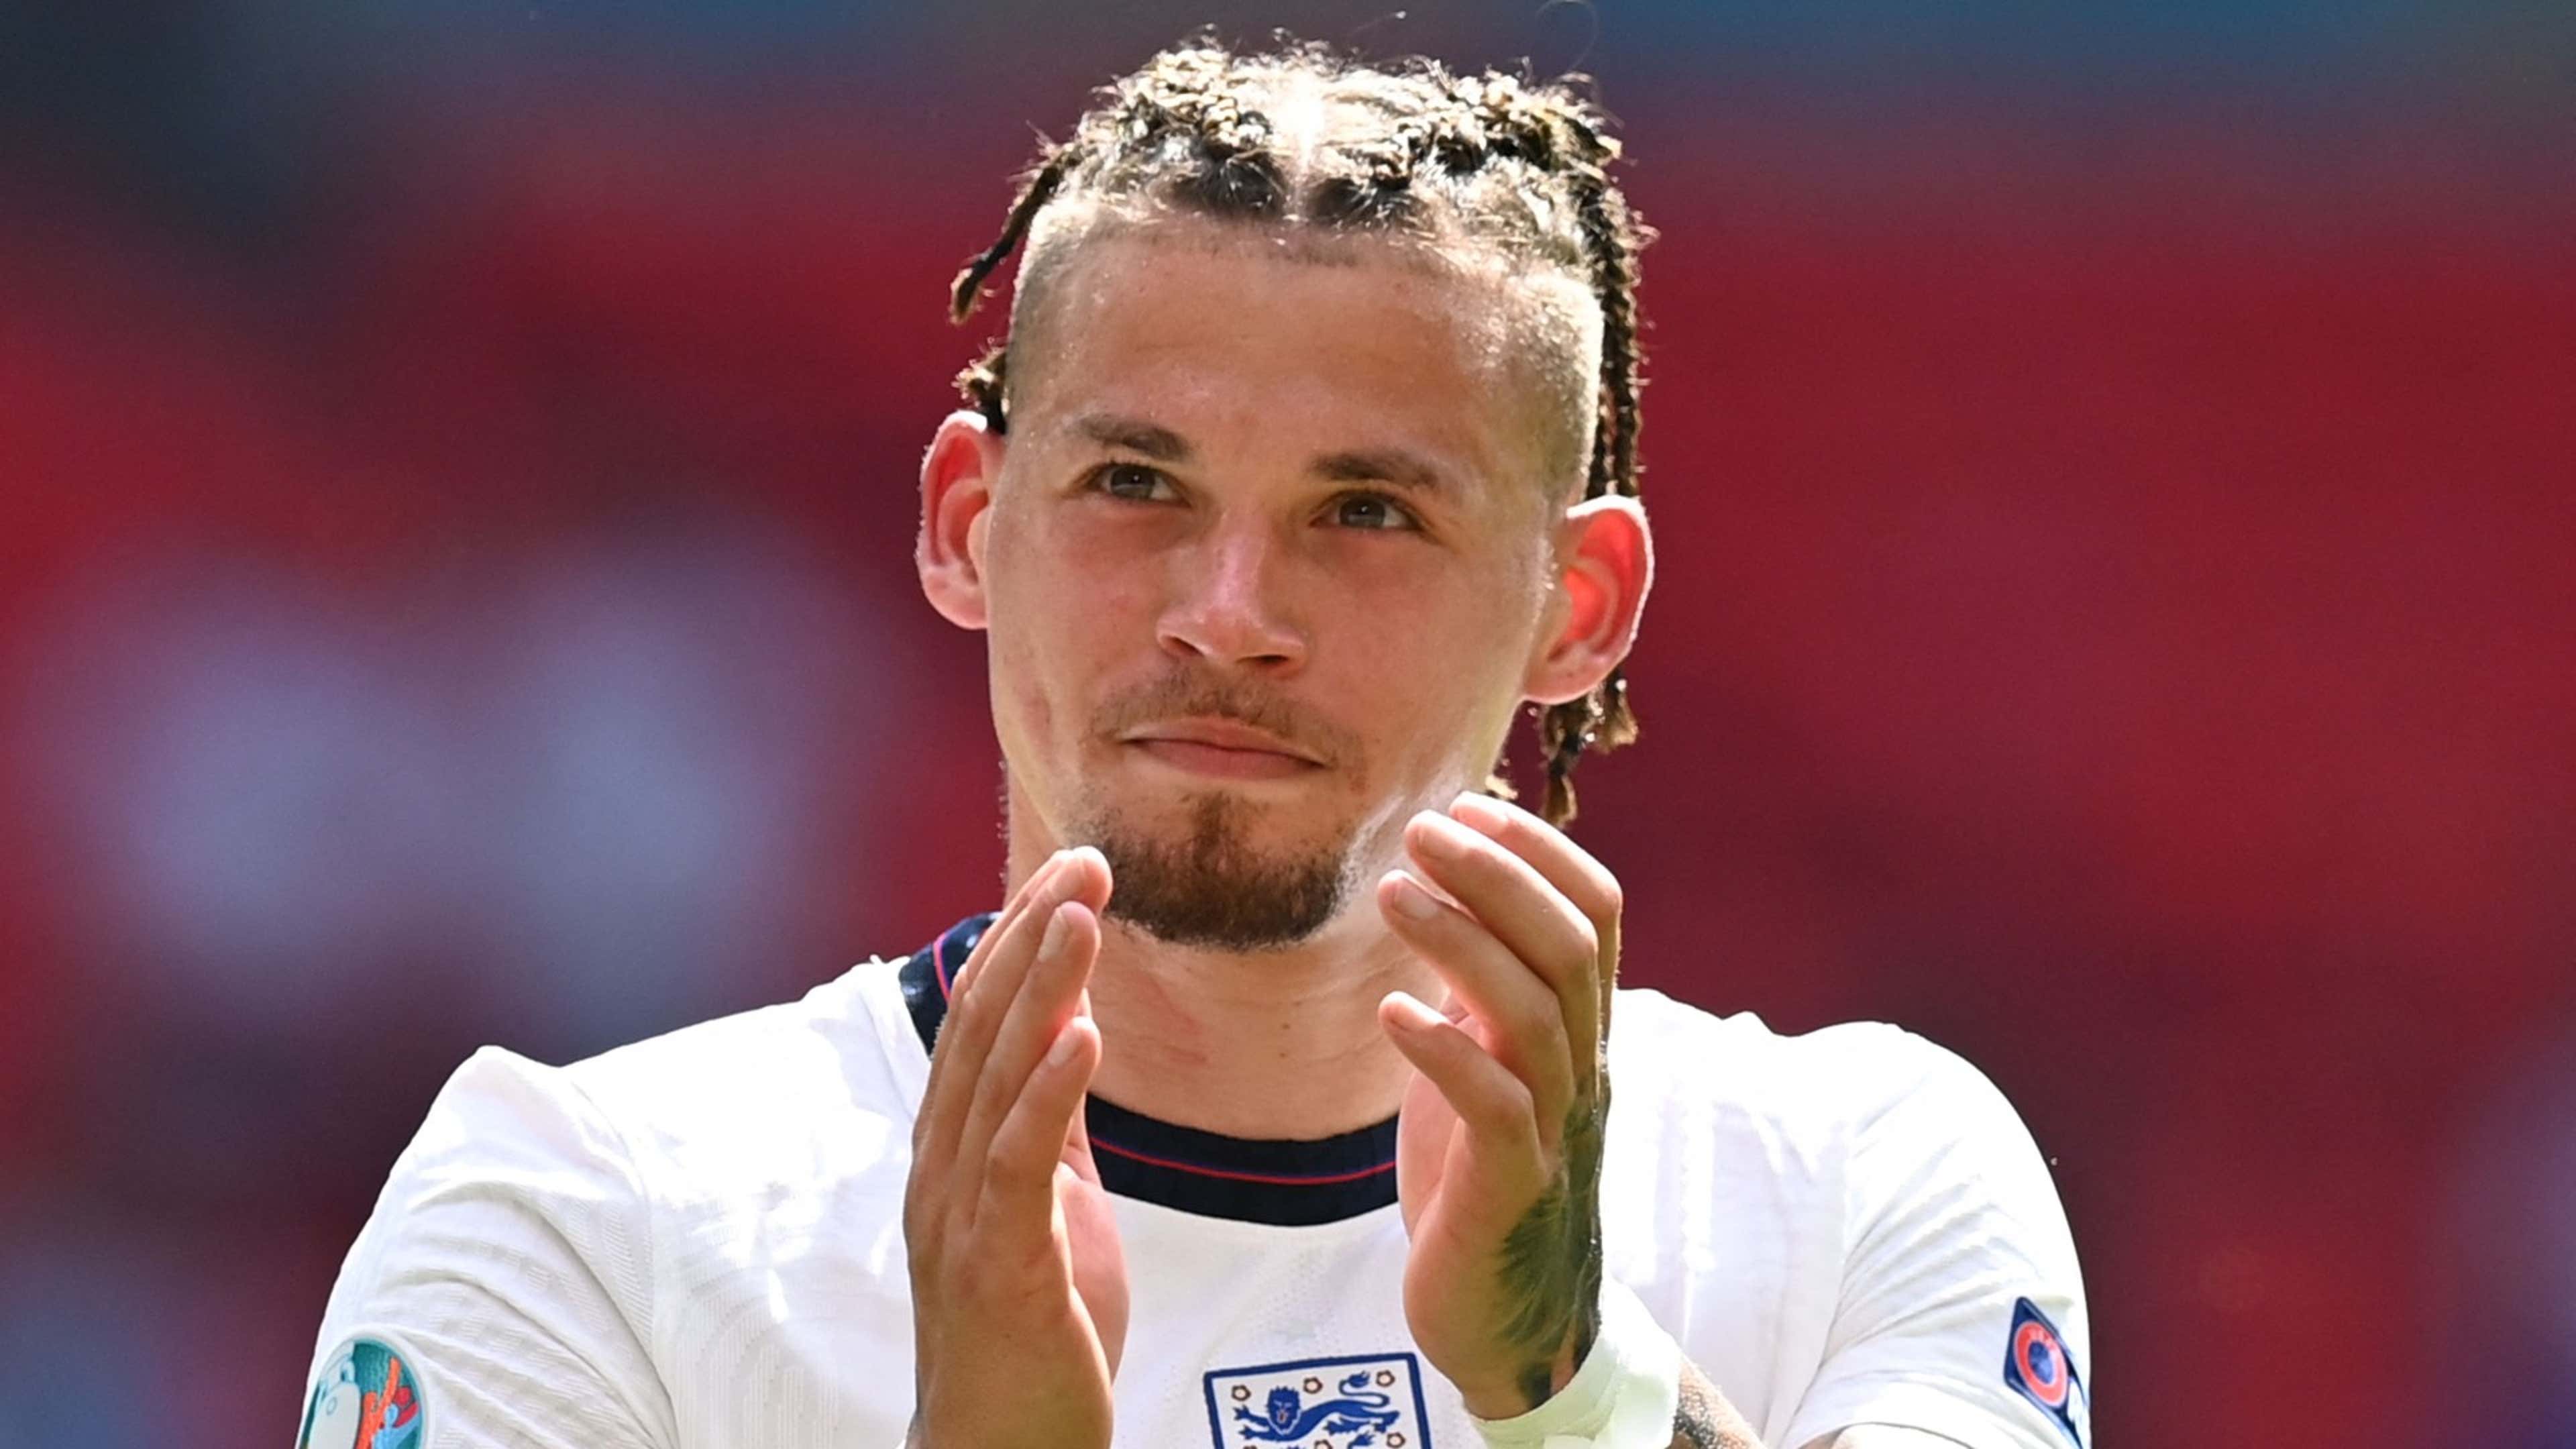 What a player Kalvin Phillips' - Ozil & Ballack impressed by